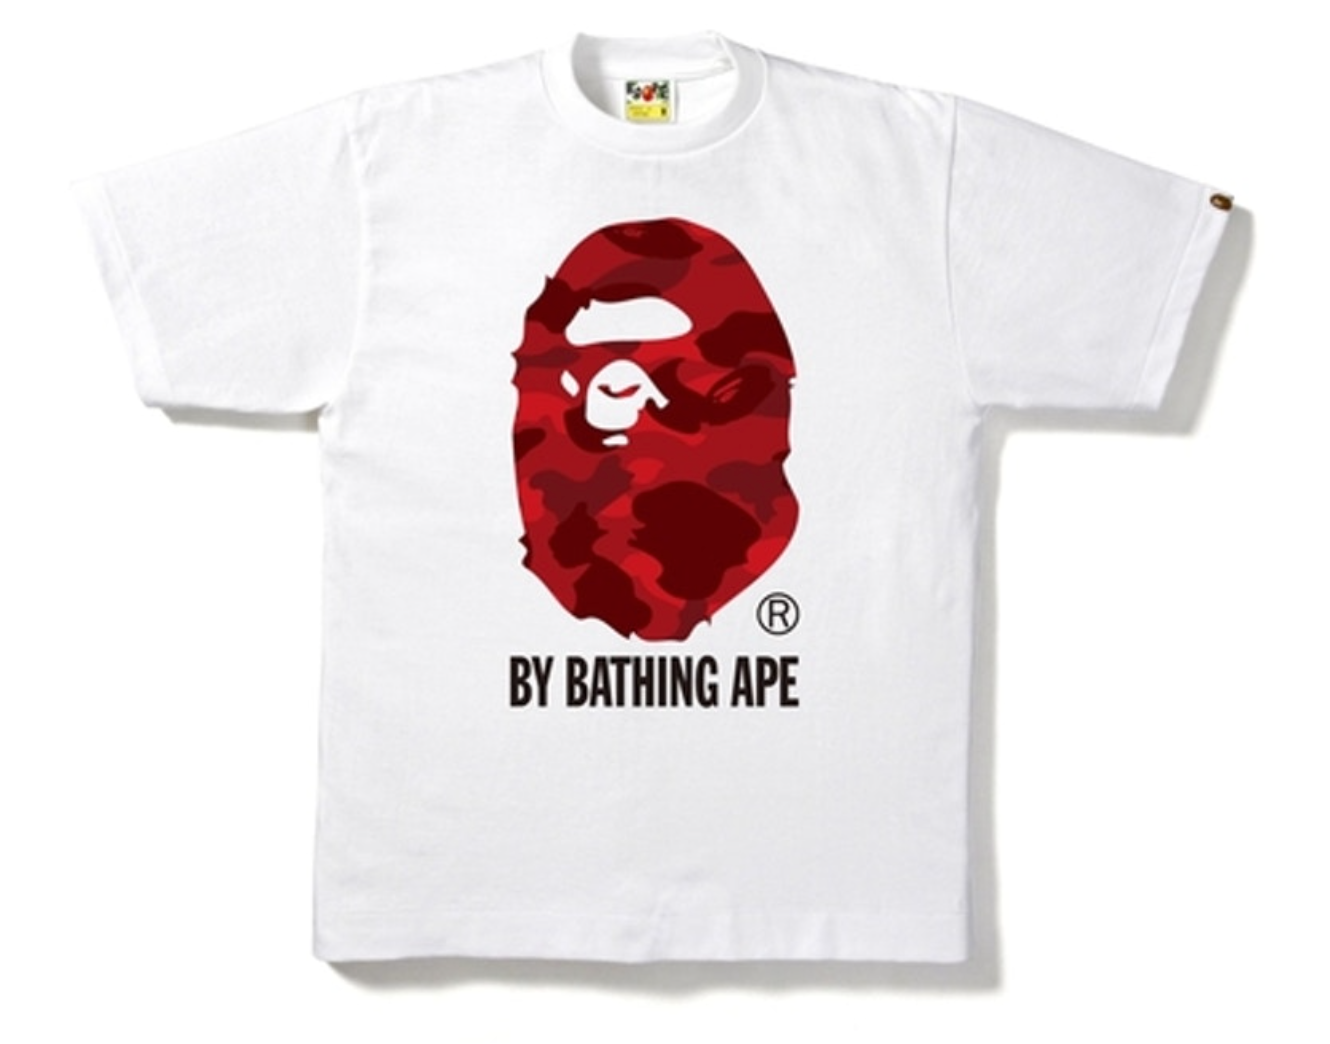 A Bathing Ape Color Camo Tee "White Red" $180.00